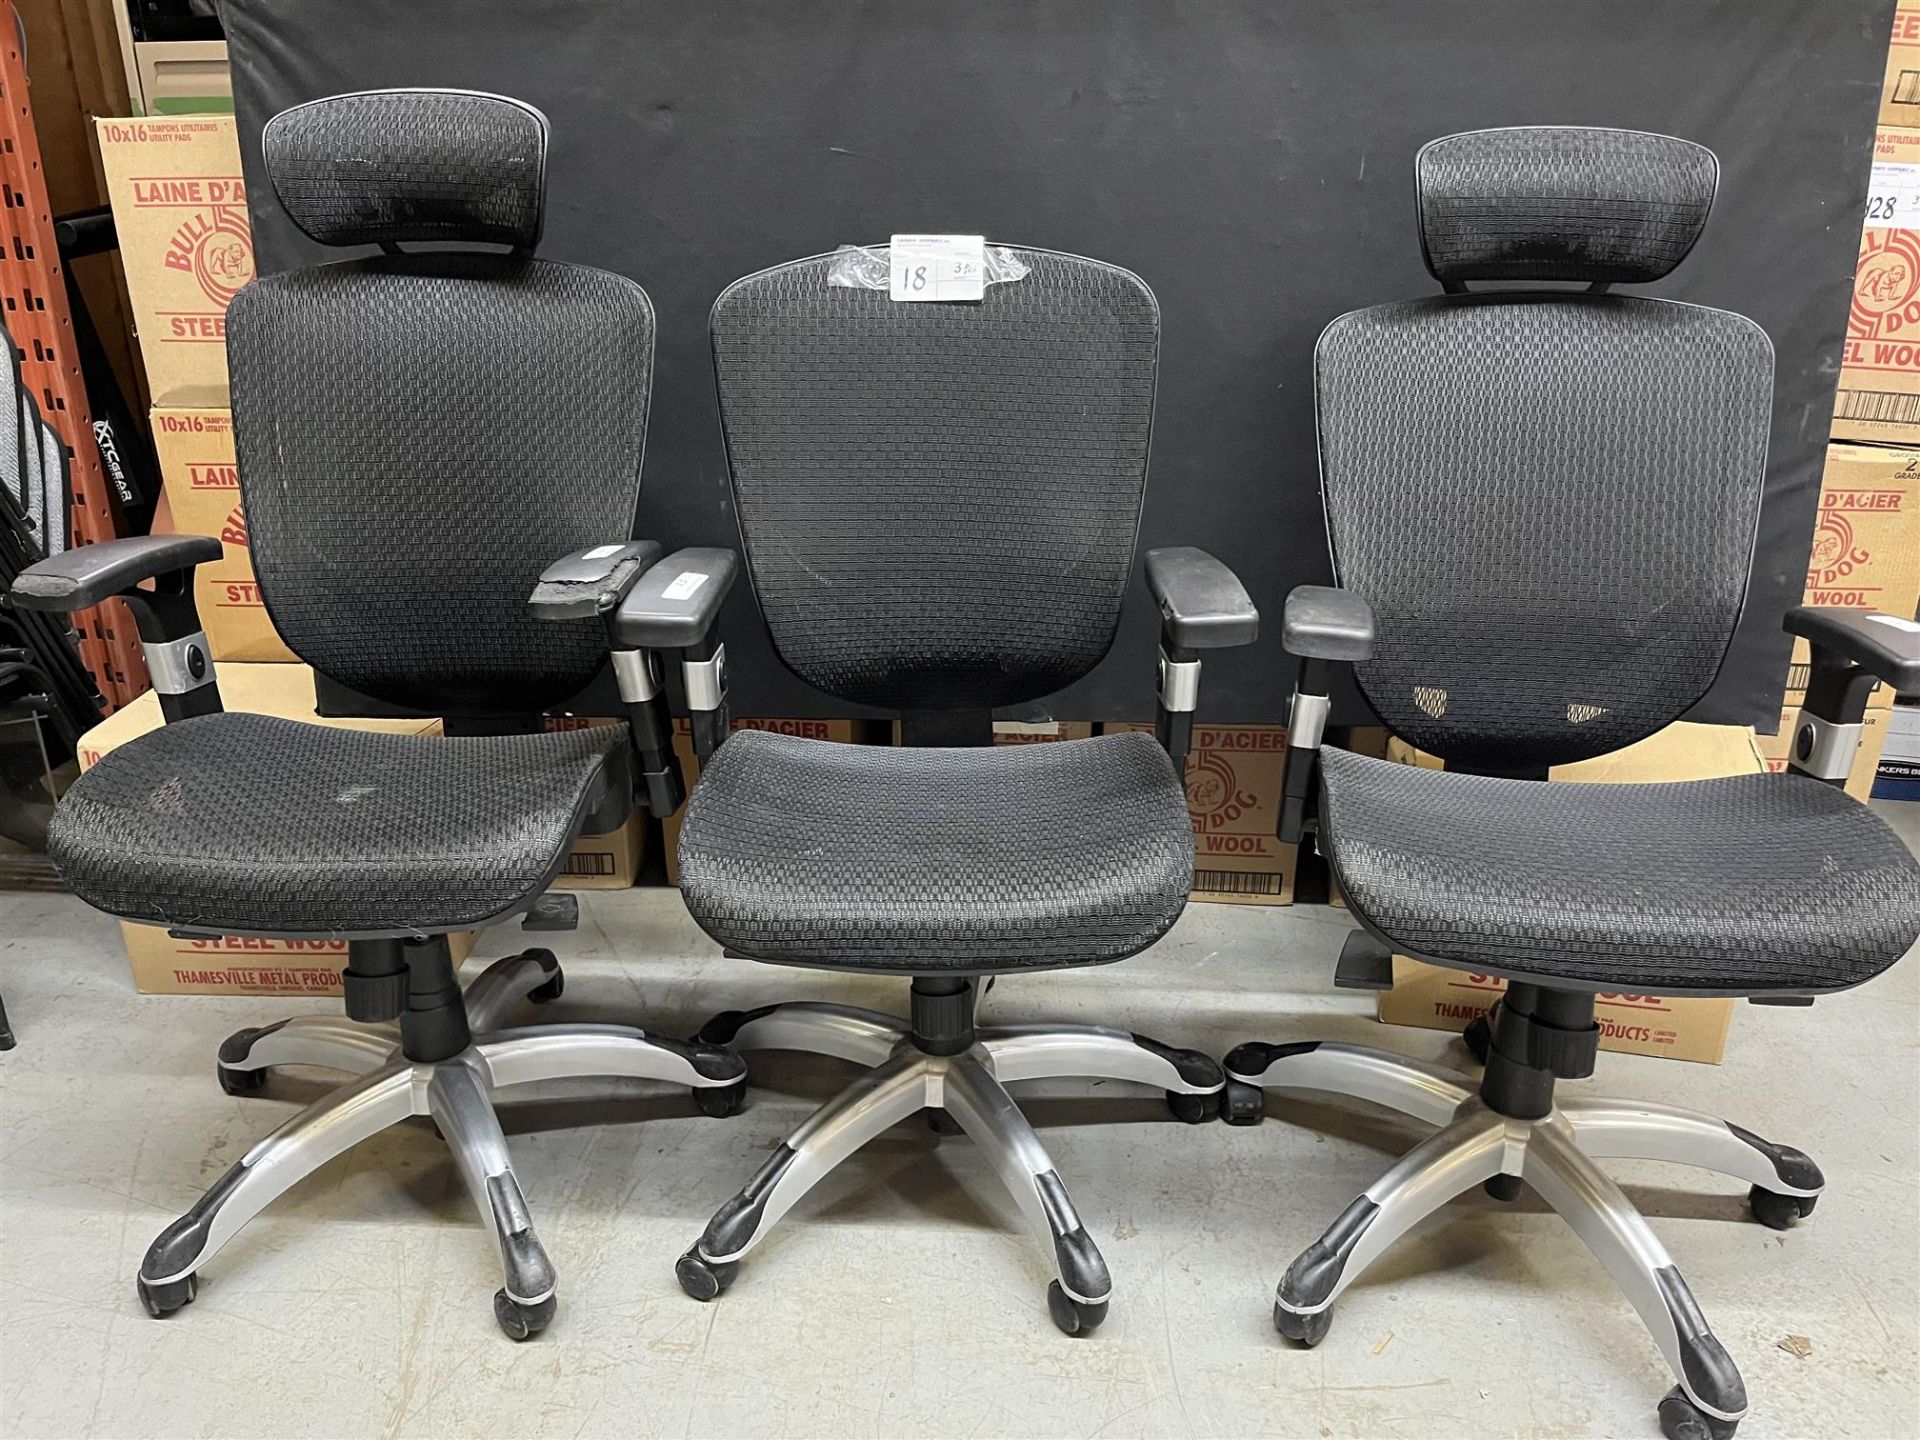 Rolling Mesh Office Chair - Quantity: x3